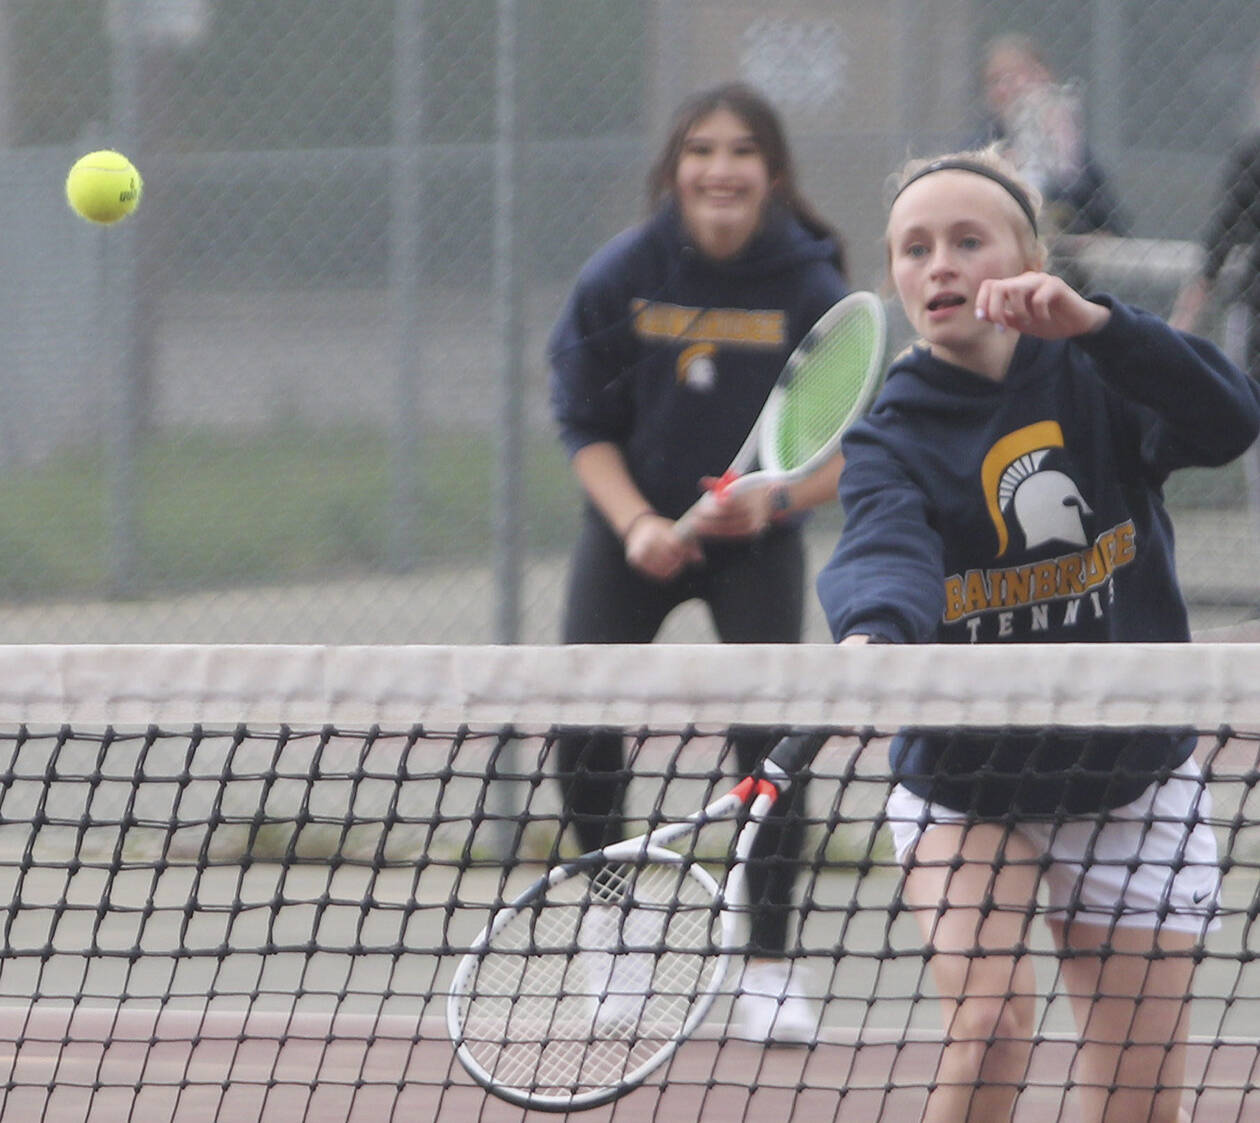 Aya Gatto, in background, smiles as BHS teammate Kristine Walker puts away a backhand volley at the net.